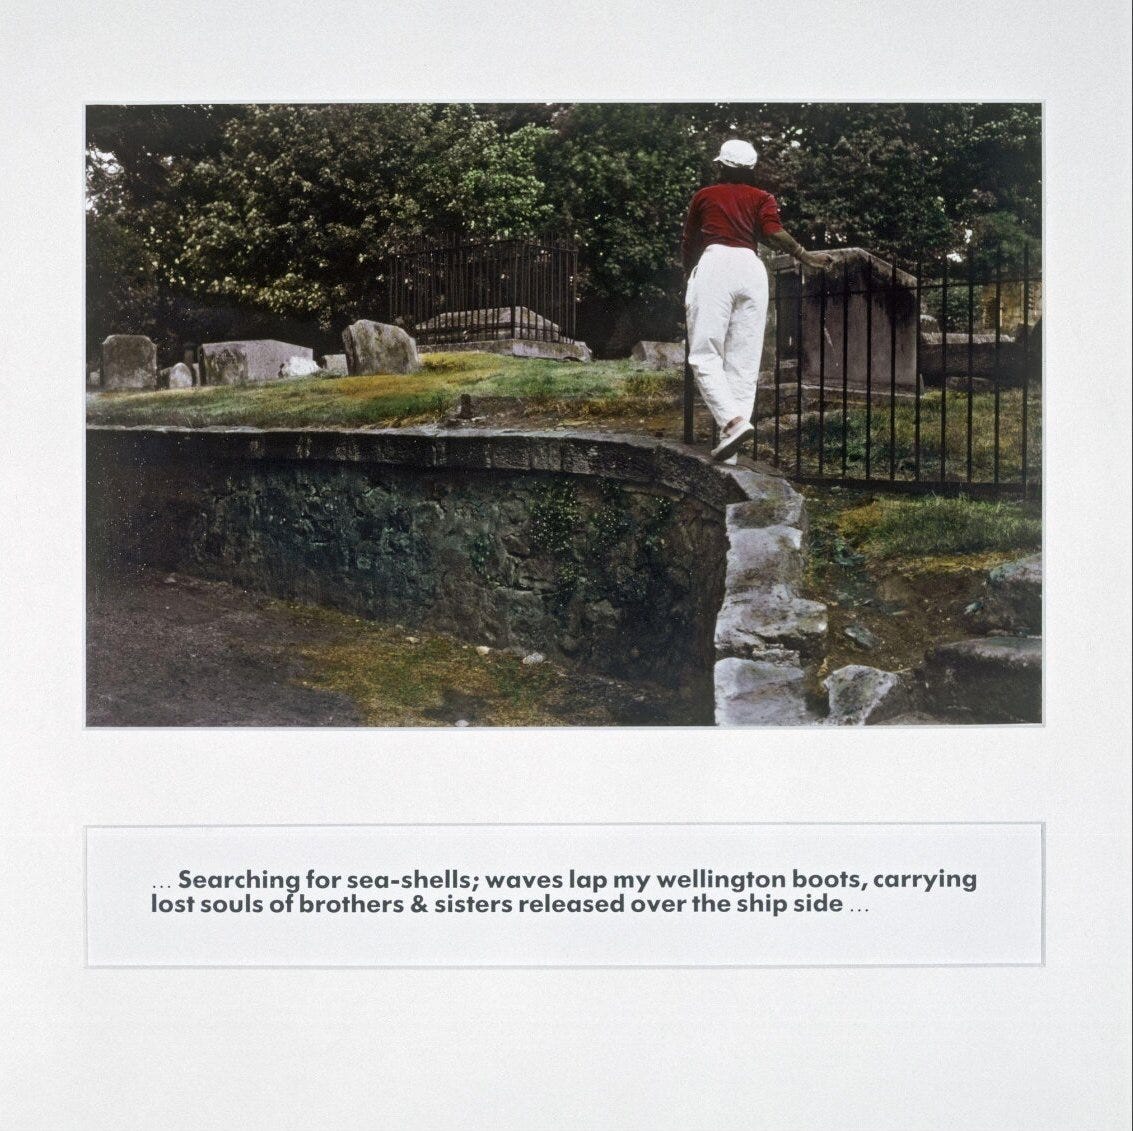 Photo from Ingrid Pollard's collection "pastoral interlude" of a Black British woman walking in front of a peaceful green cemetery.